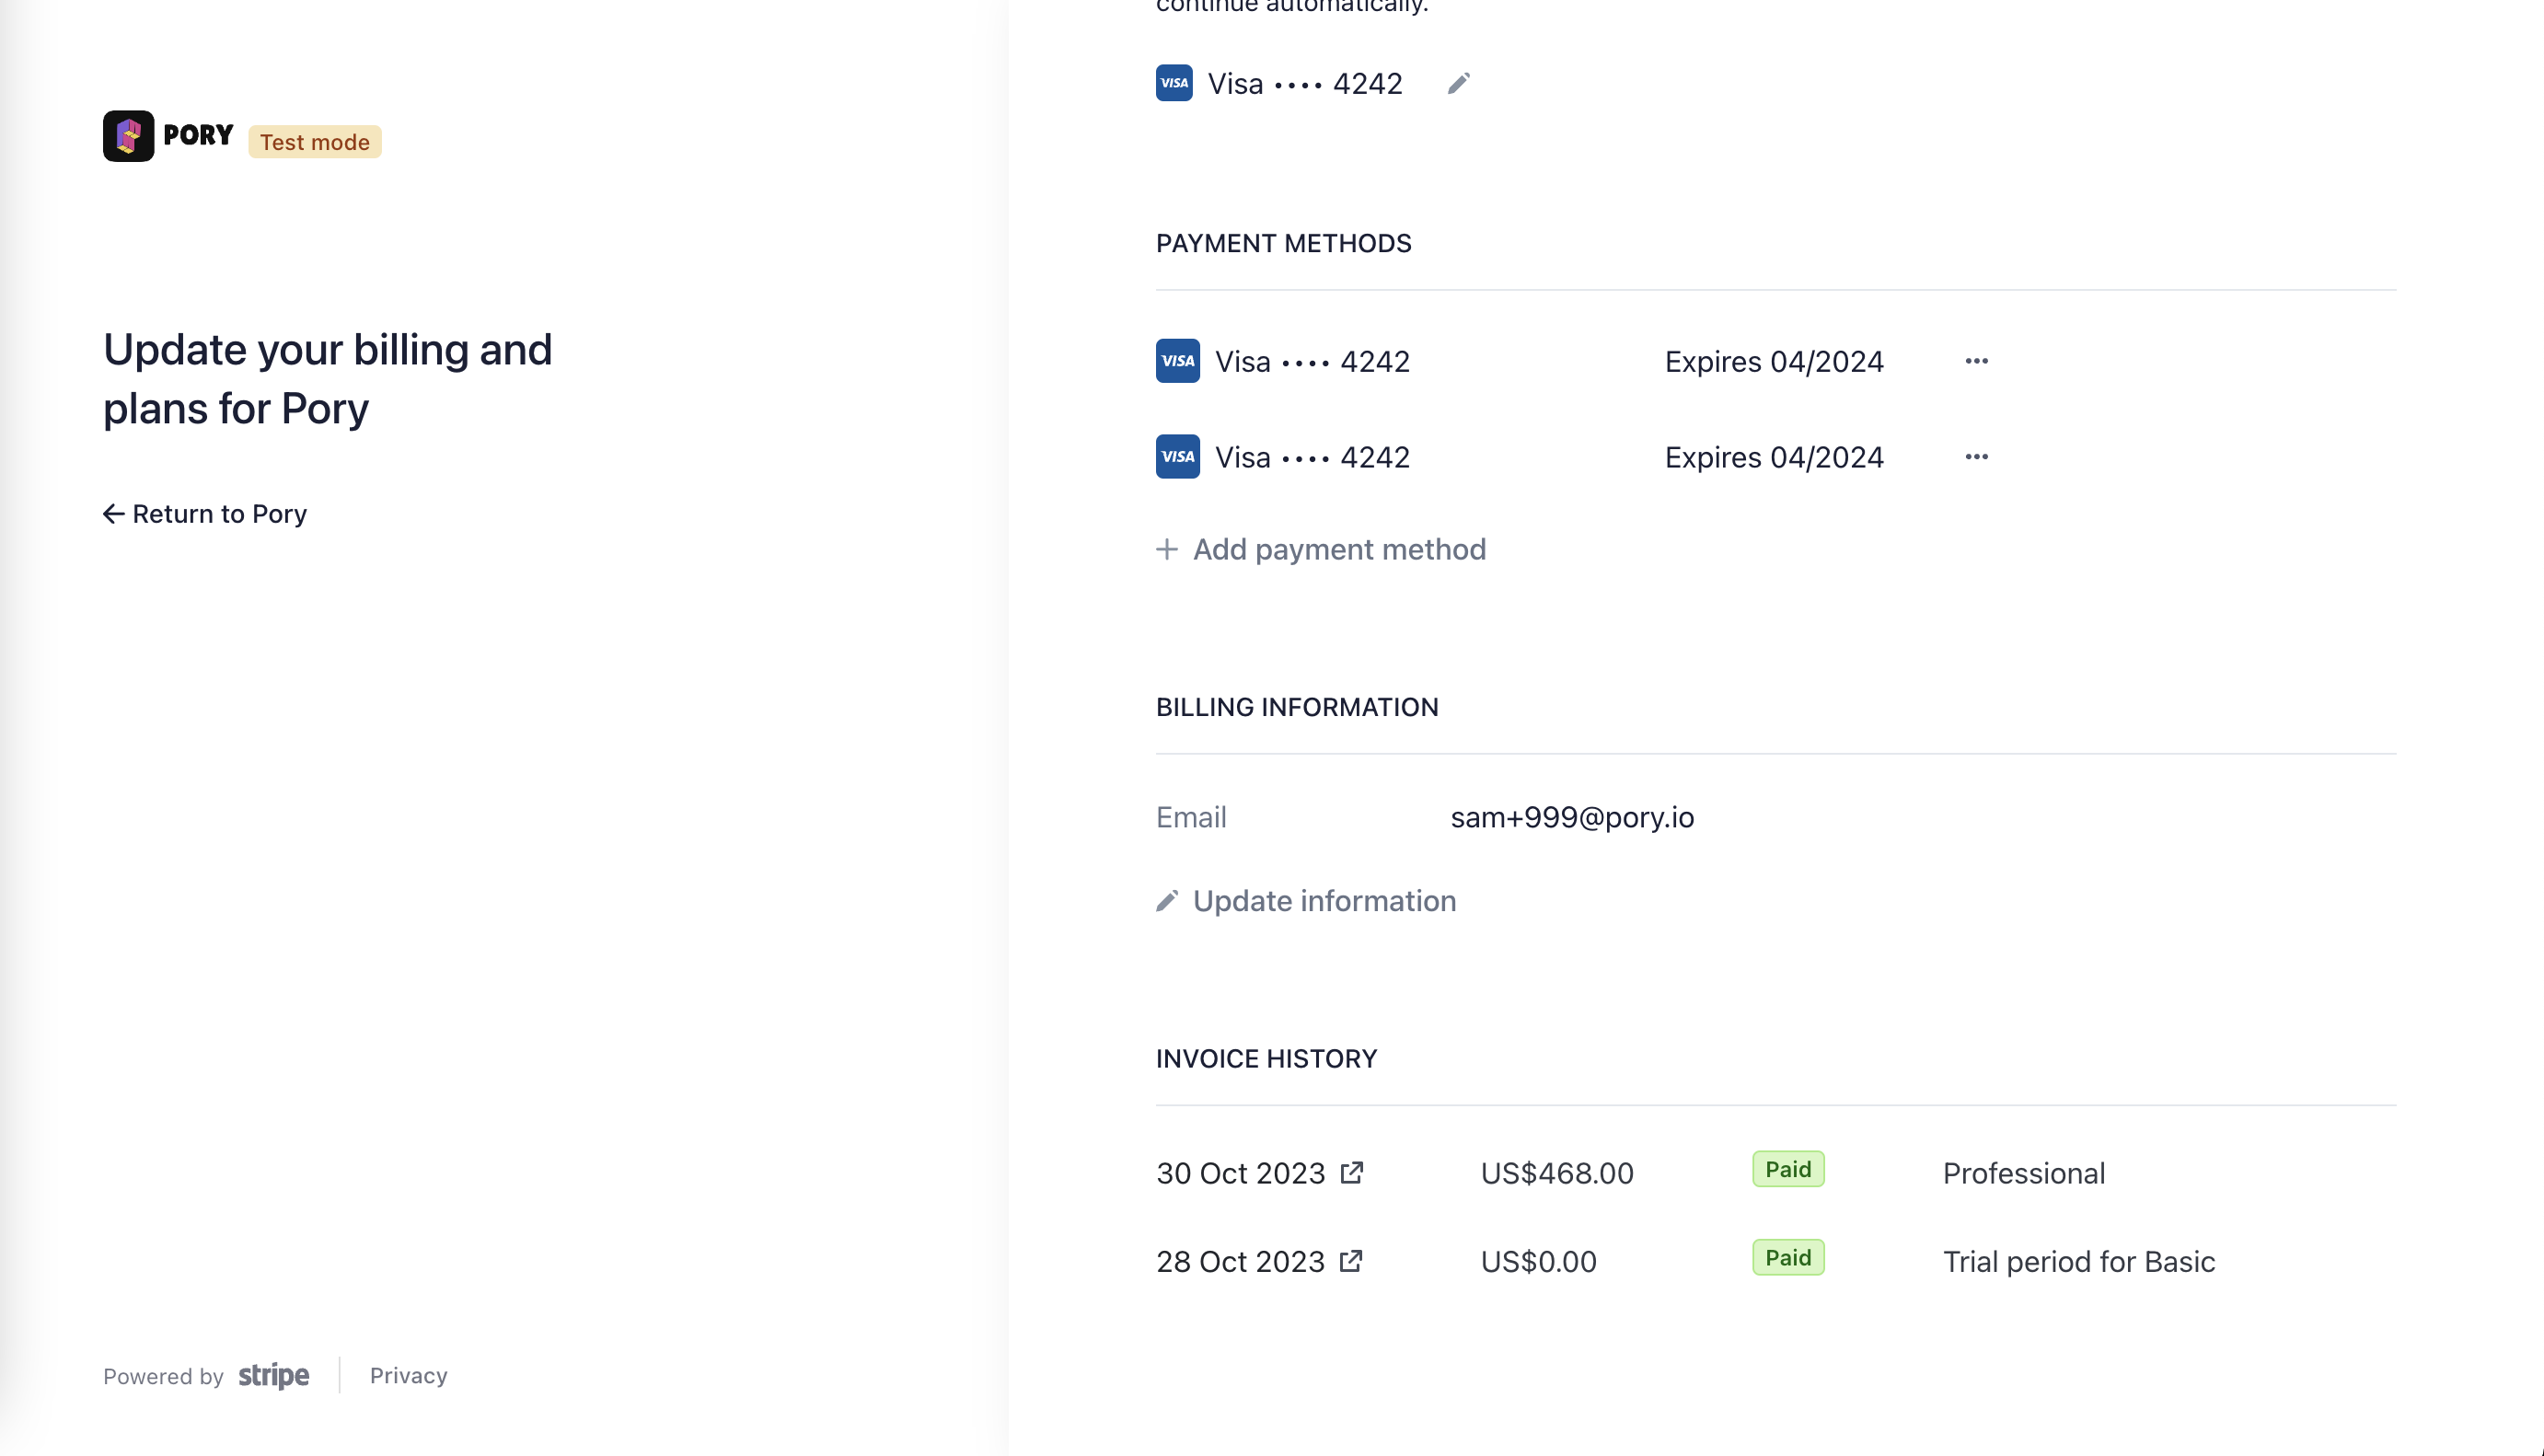 Invoice history section on Stripe dashboard